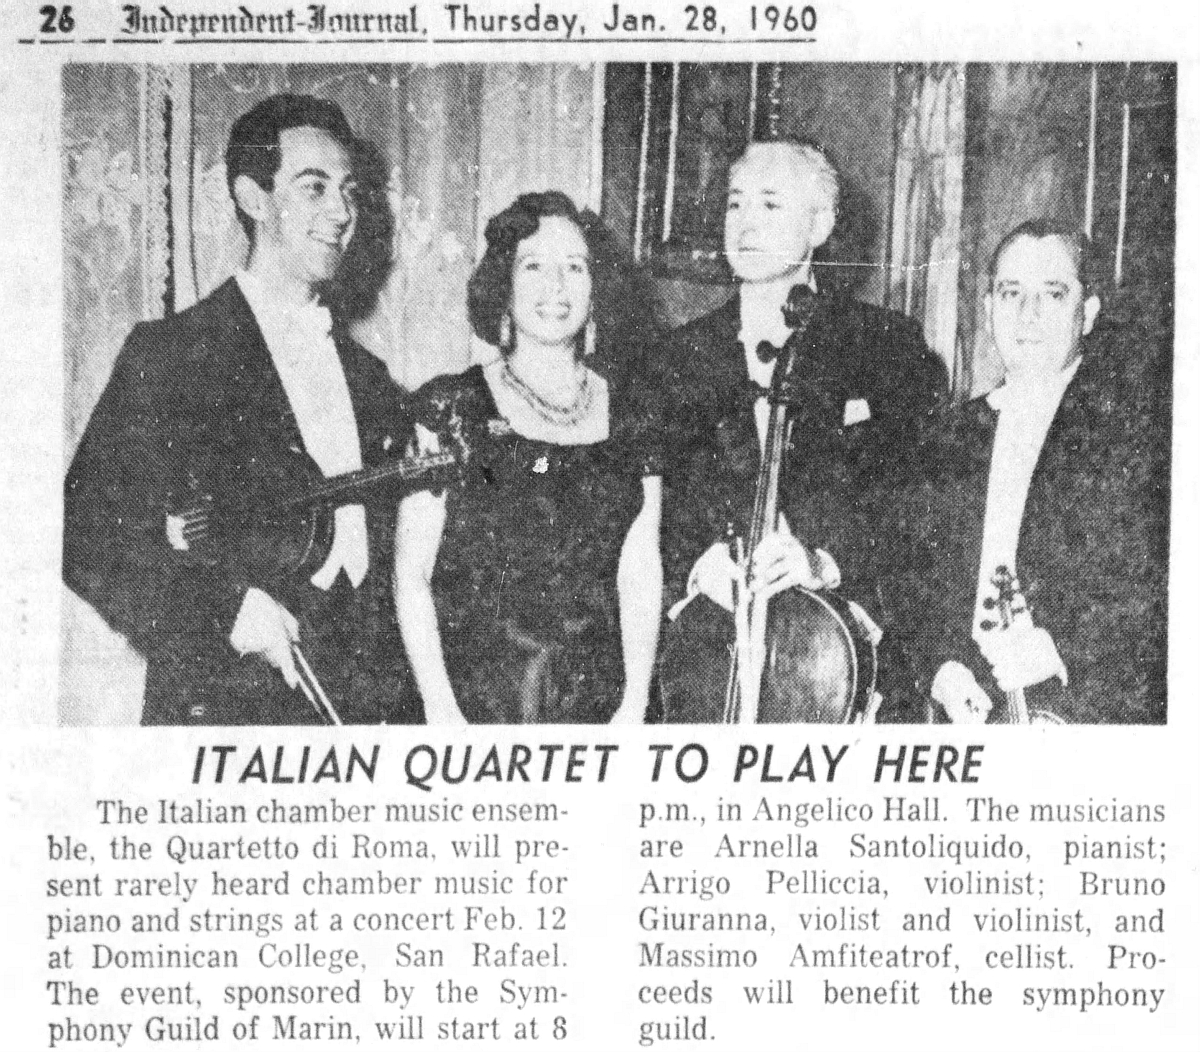 Quartetto di Roma, Daily Independent Journal, Thu Jan 28 1960, page 26, cliquer pour une vue agrandie